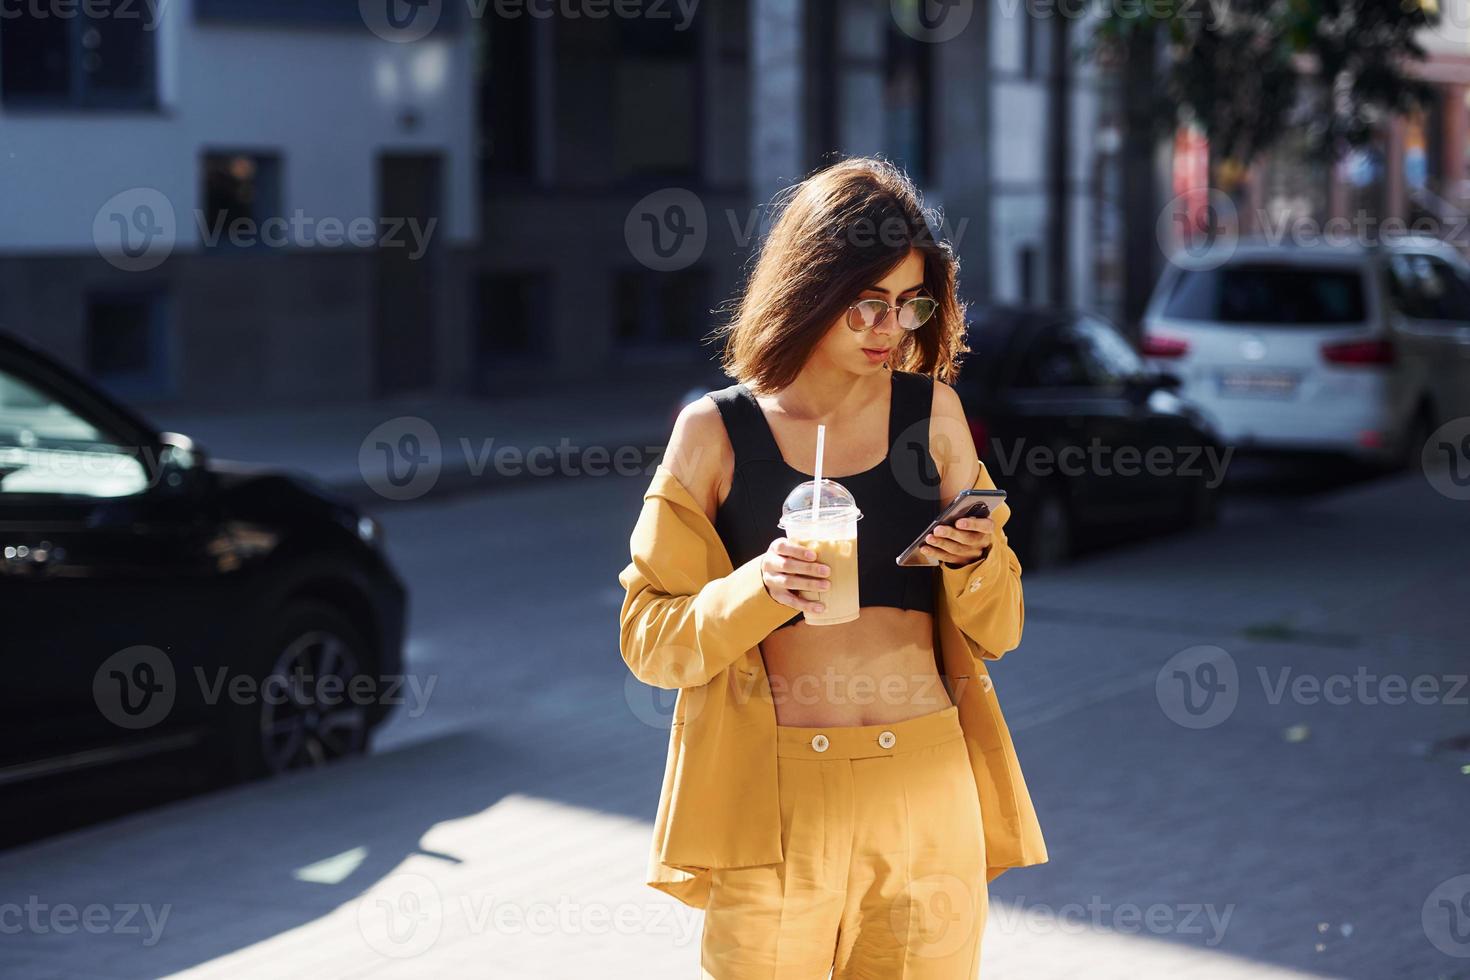 Coffee break. Young fashionable woman in burgundy colored coat at daytime with her car photo